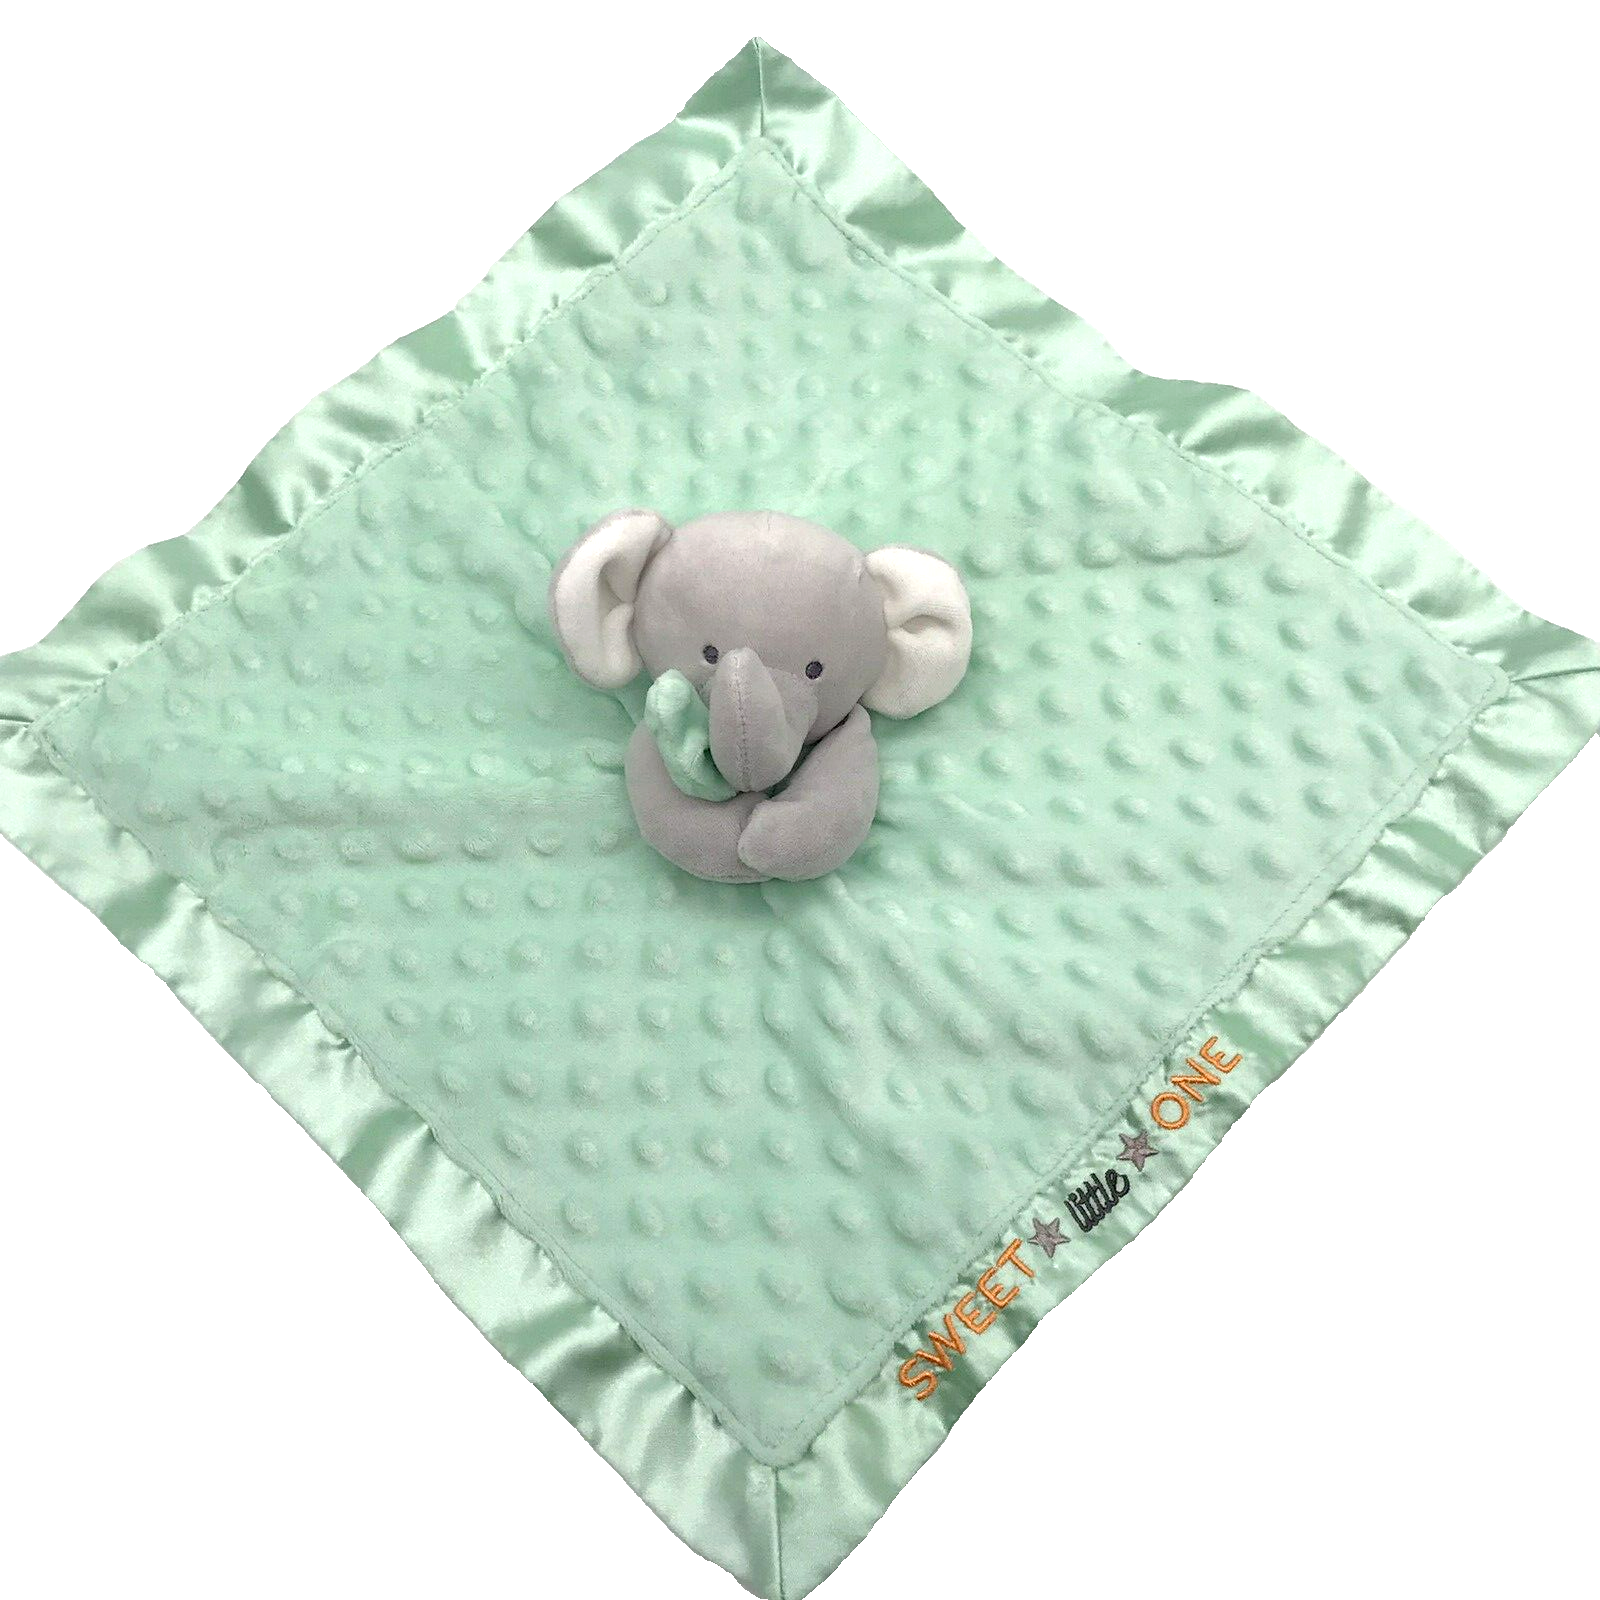 Primary image for Carter's Lovey Elephant Security Blanket Sweet Little One Minky Satin Trim